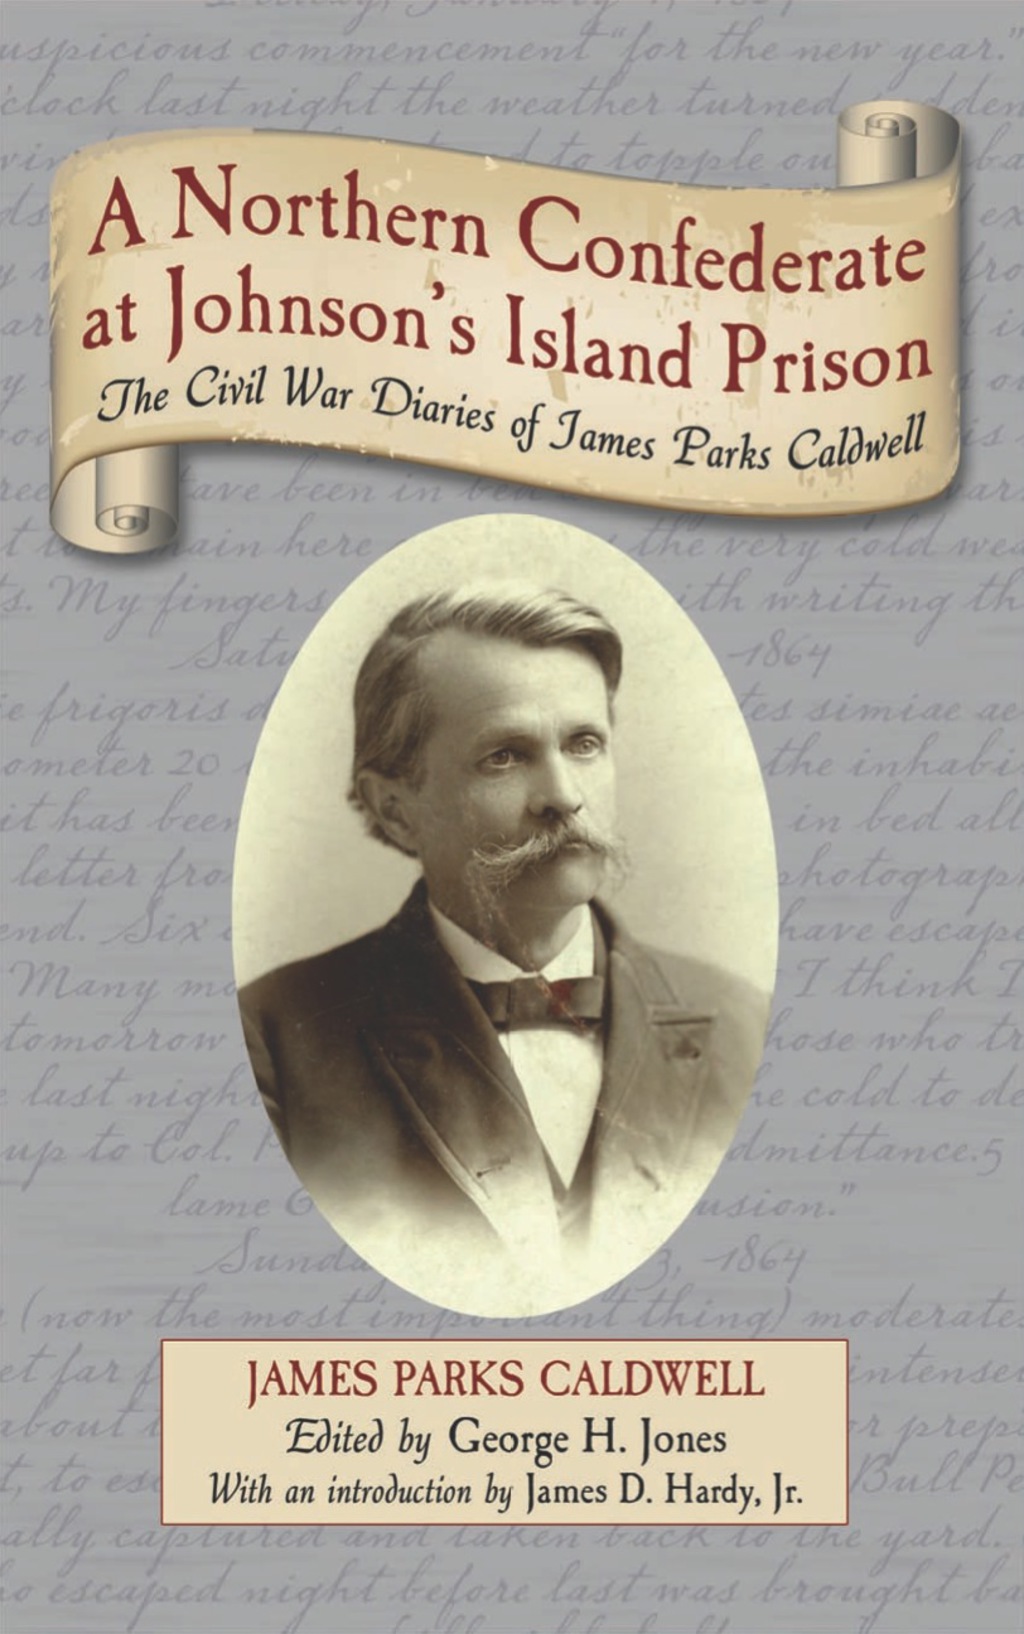 A Northern Confederate at Johnson's Island Prison: The Civil War Diaries of James Parks Caldwell (eBook) - James Parks Caldwell,